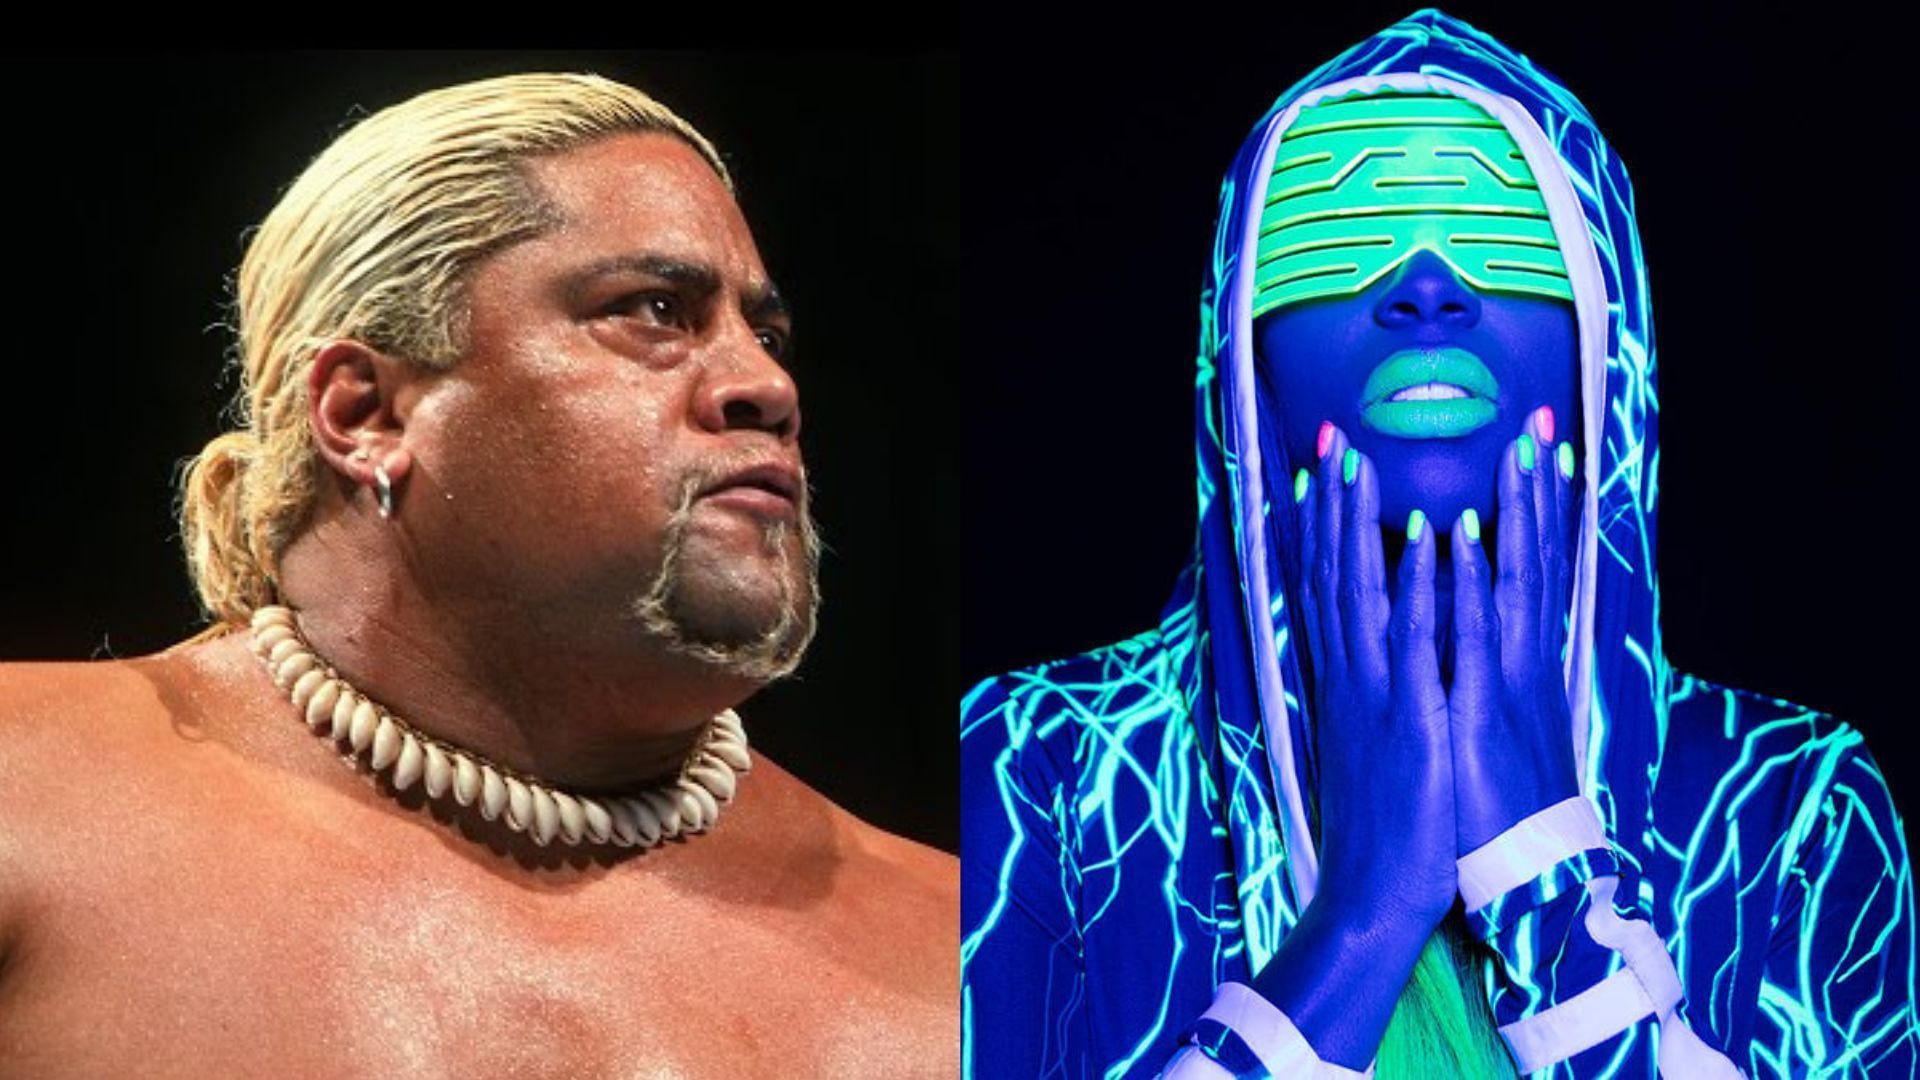 Rikishi sent a wholesome message to Naomi after her WWE return